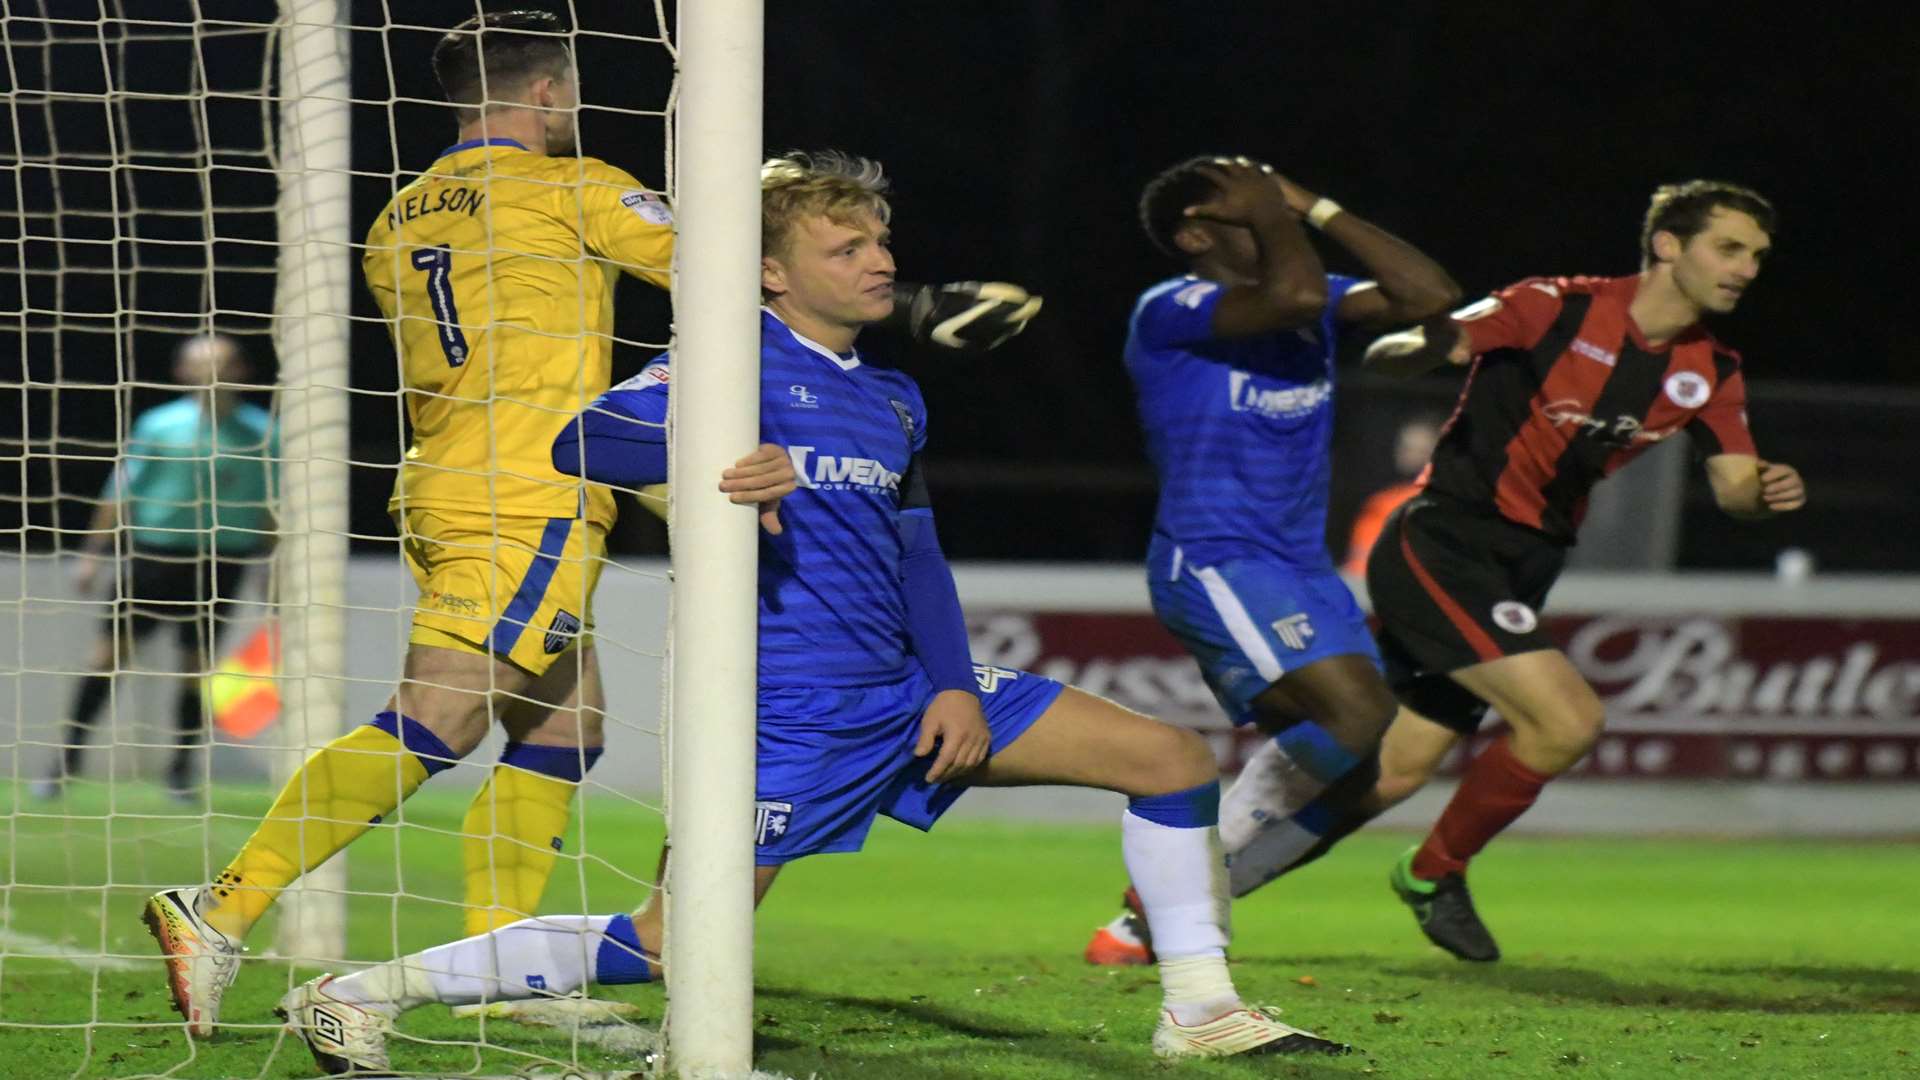 Disappointment for Gillingham as Brackley score their third Picture: Barry Goodwin